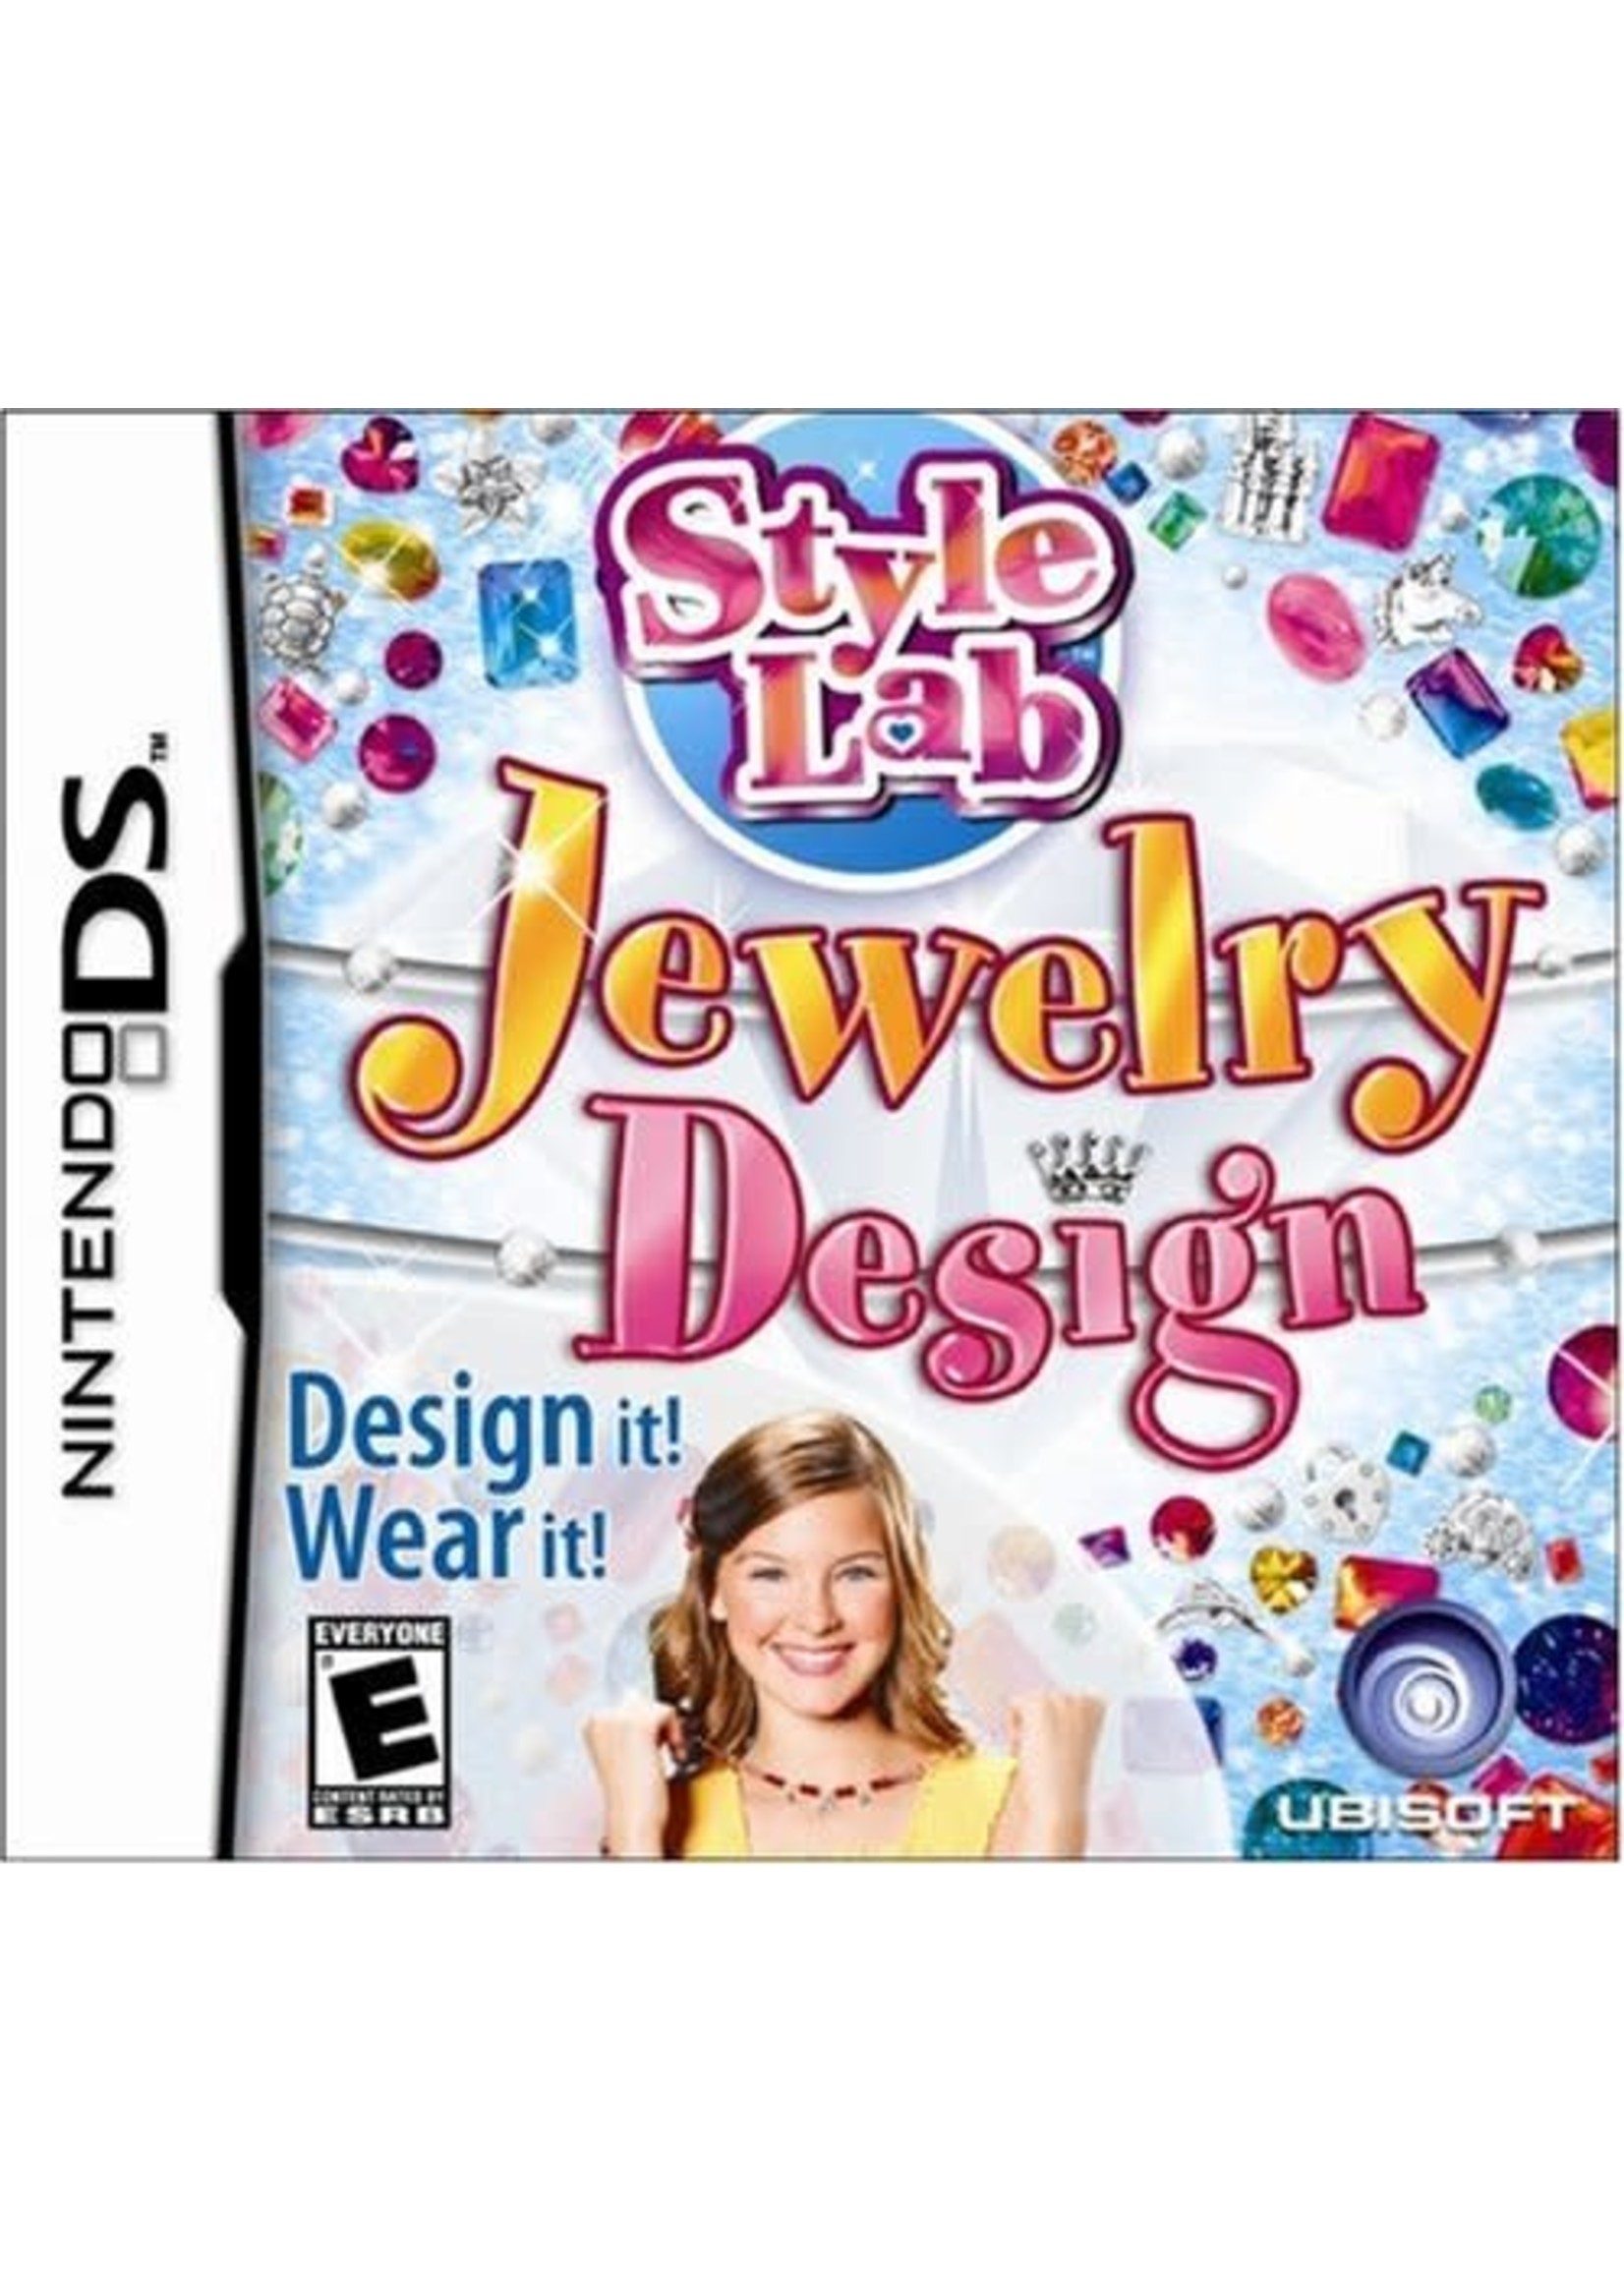 Nintendo DS Style Lab: Jewelry Design - Cart Only